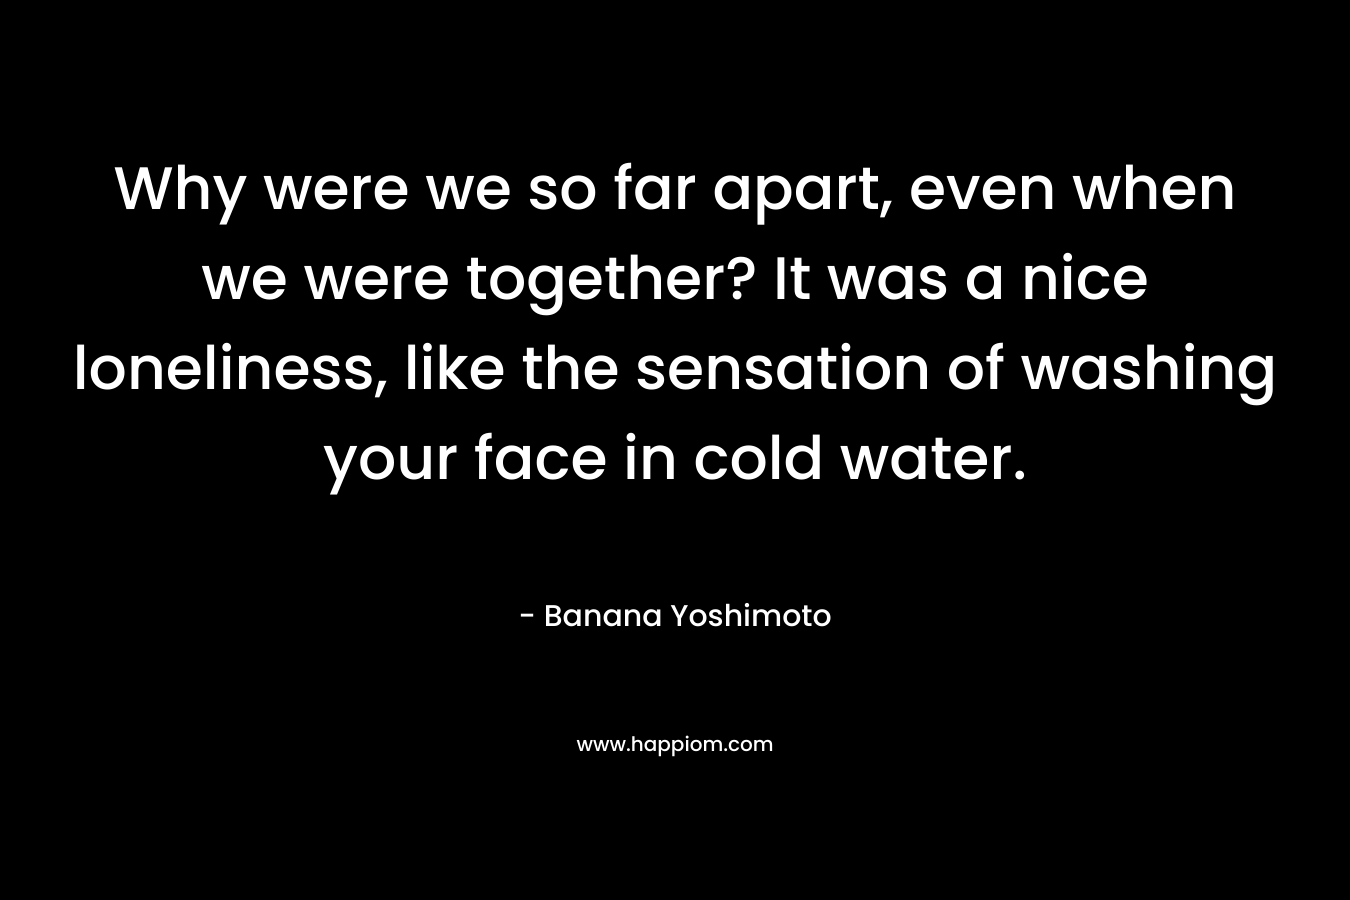 Why were we so far apart, even when we were together? It was a nice loneliness, like the sensation of washing your face in cold water. – Banana Yoshimoto